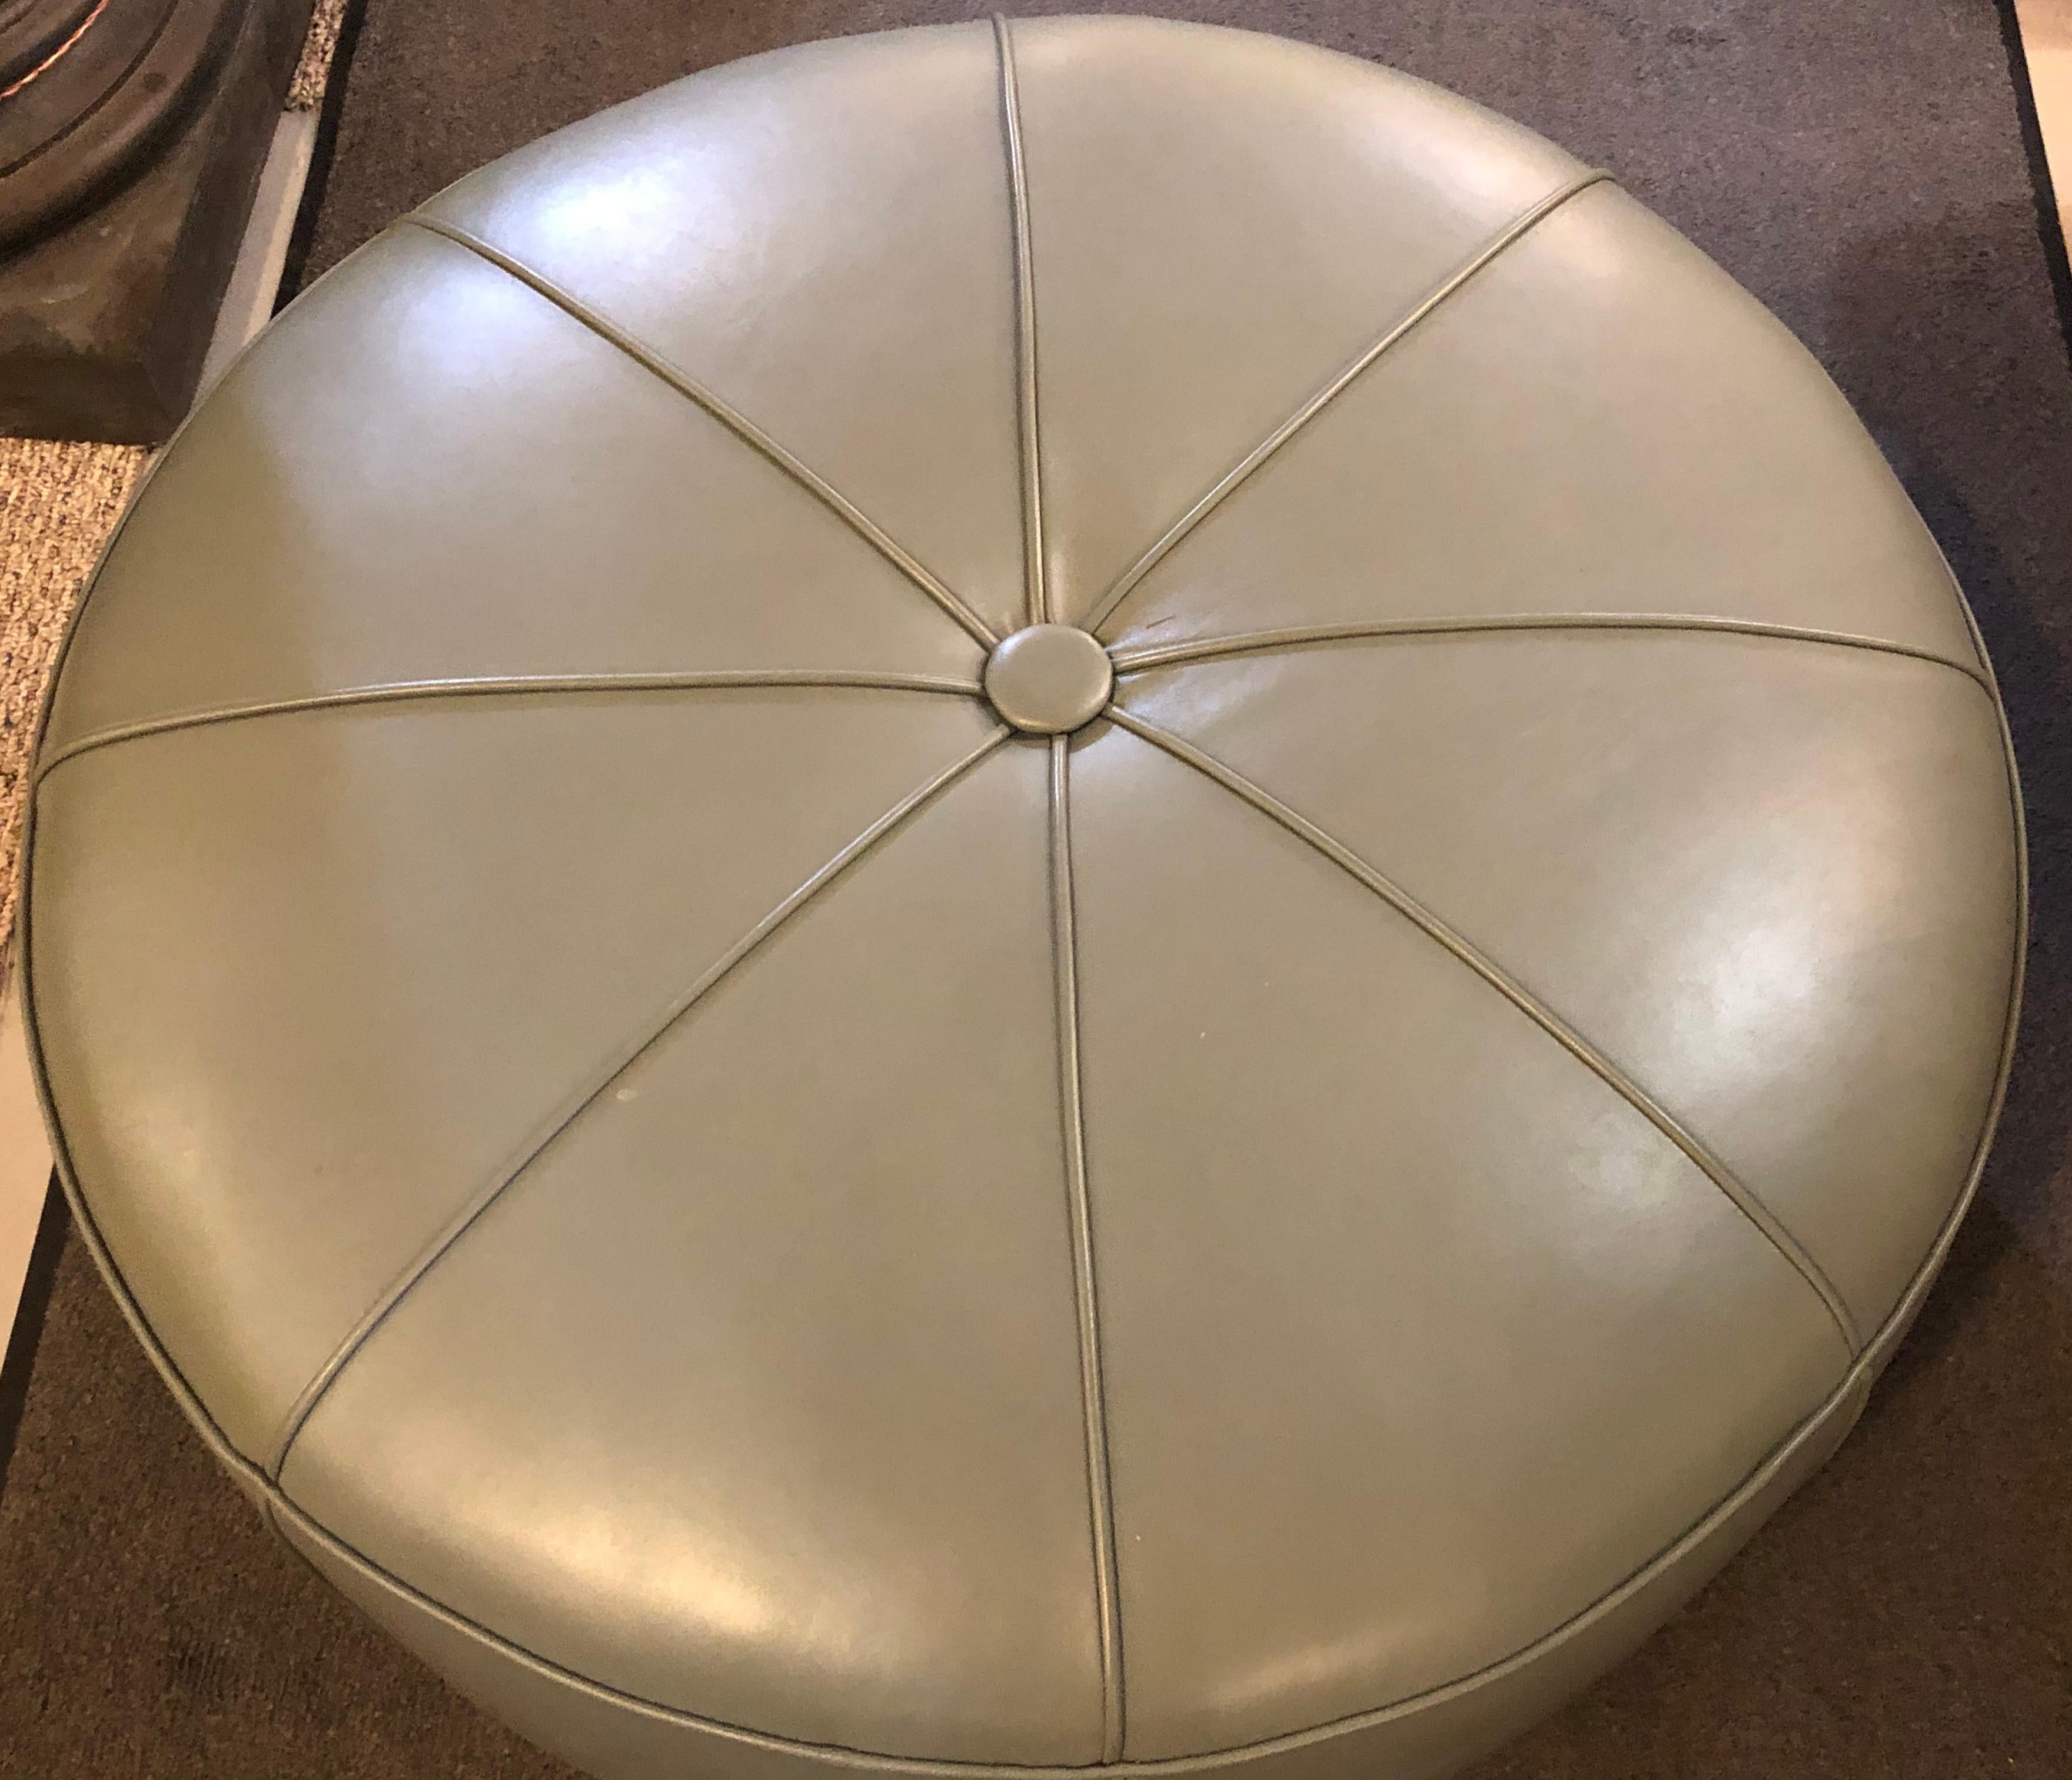 Leather modern mint ottoman or pouf in pie form. Fine clean lines on this sleek and stylish designed ottoman or footstool that would easily fit into any decorative space.